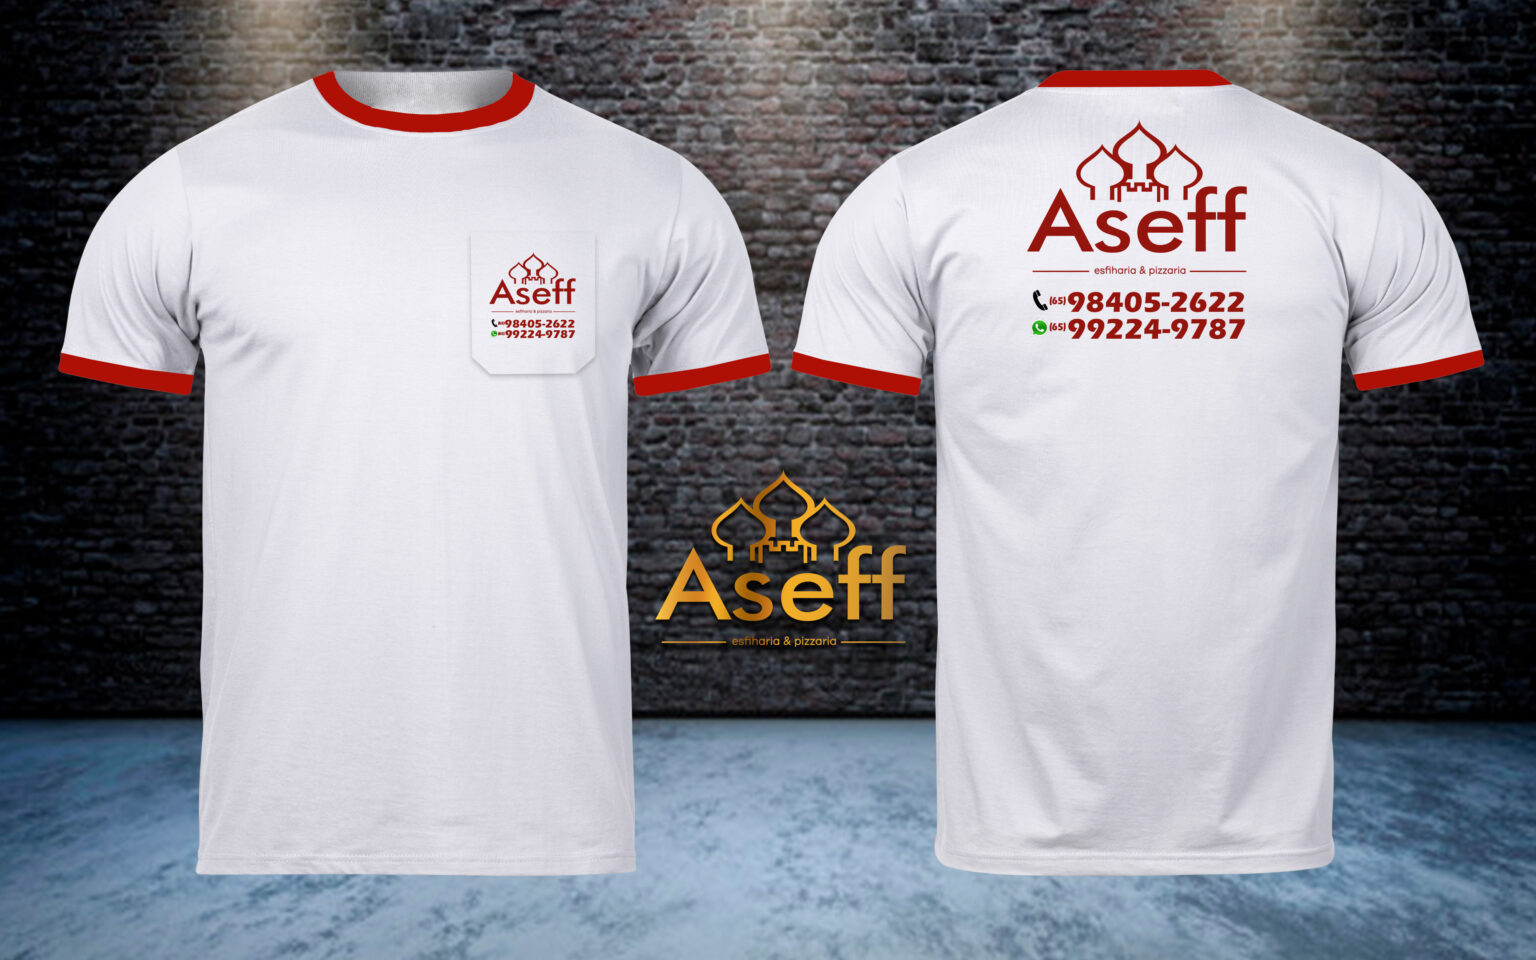 Grey t-shirt front and back mock-up template for your design.